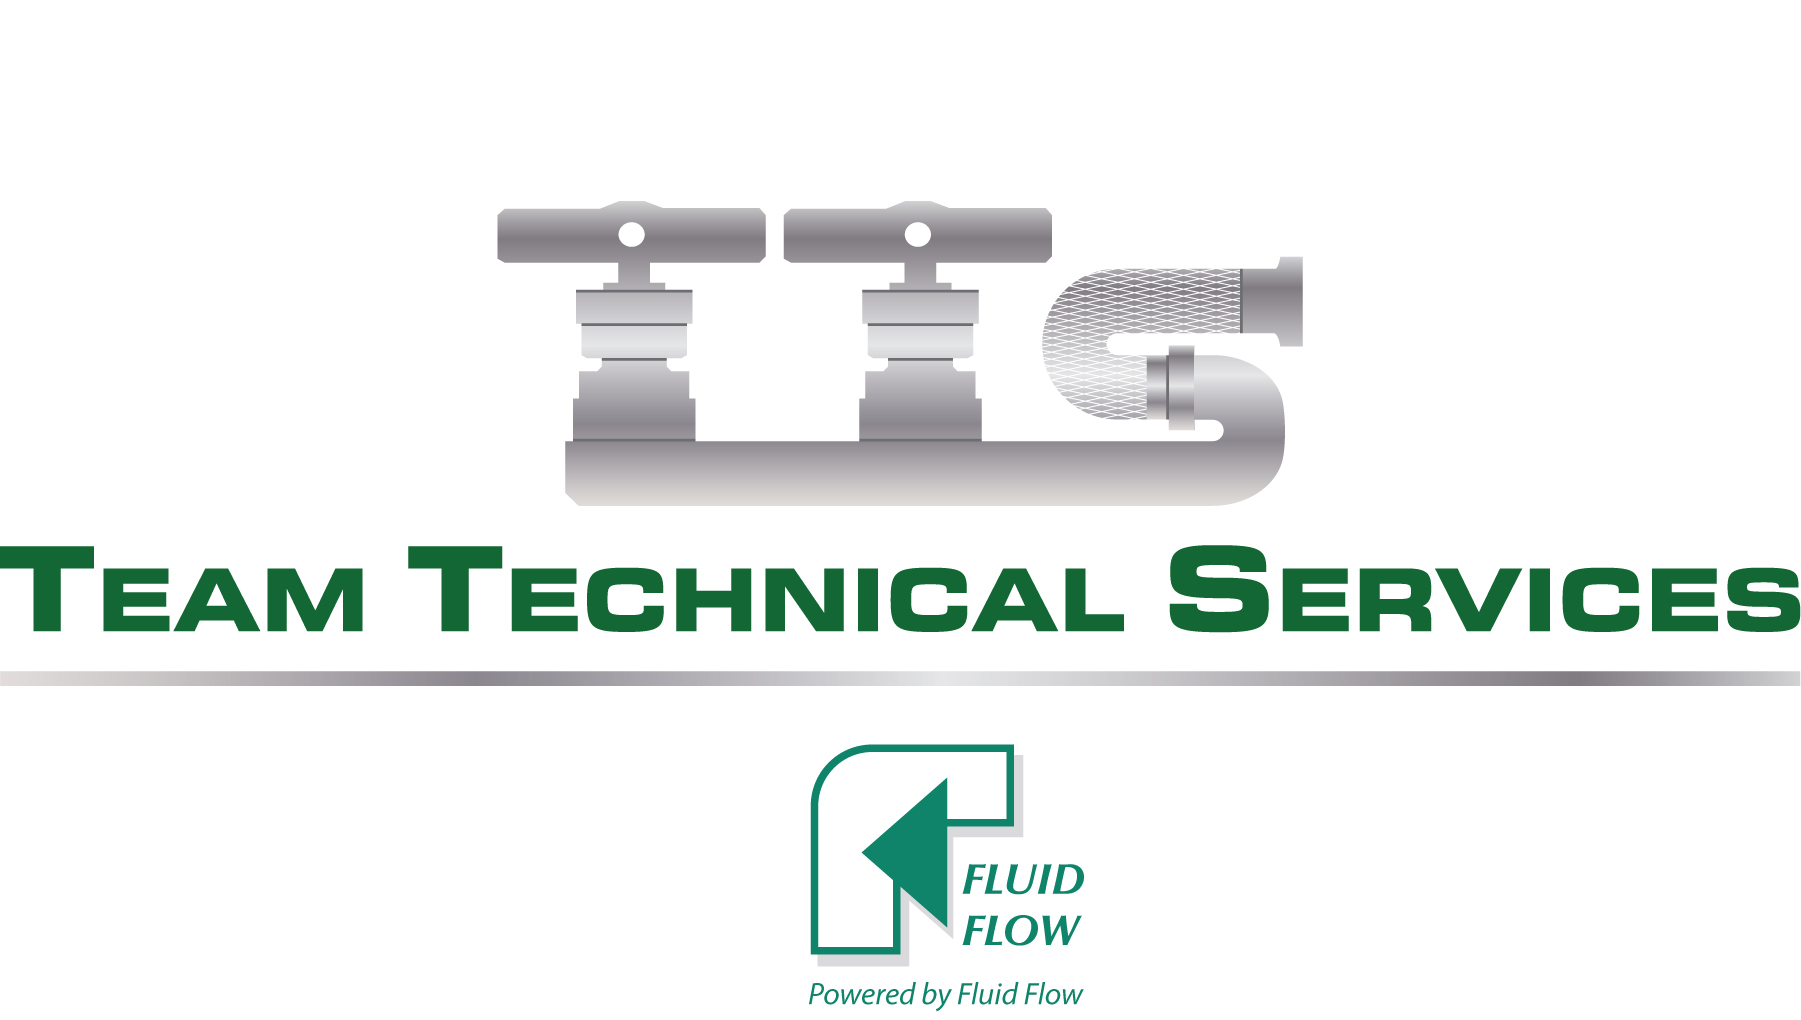 Team Technical Services